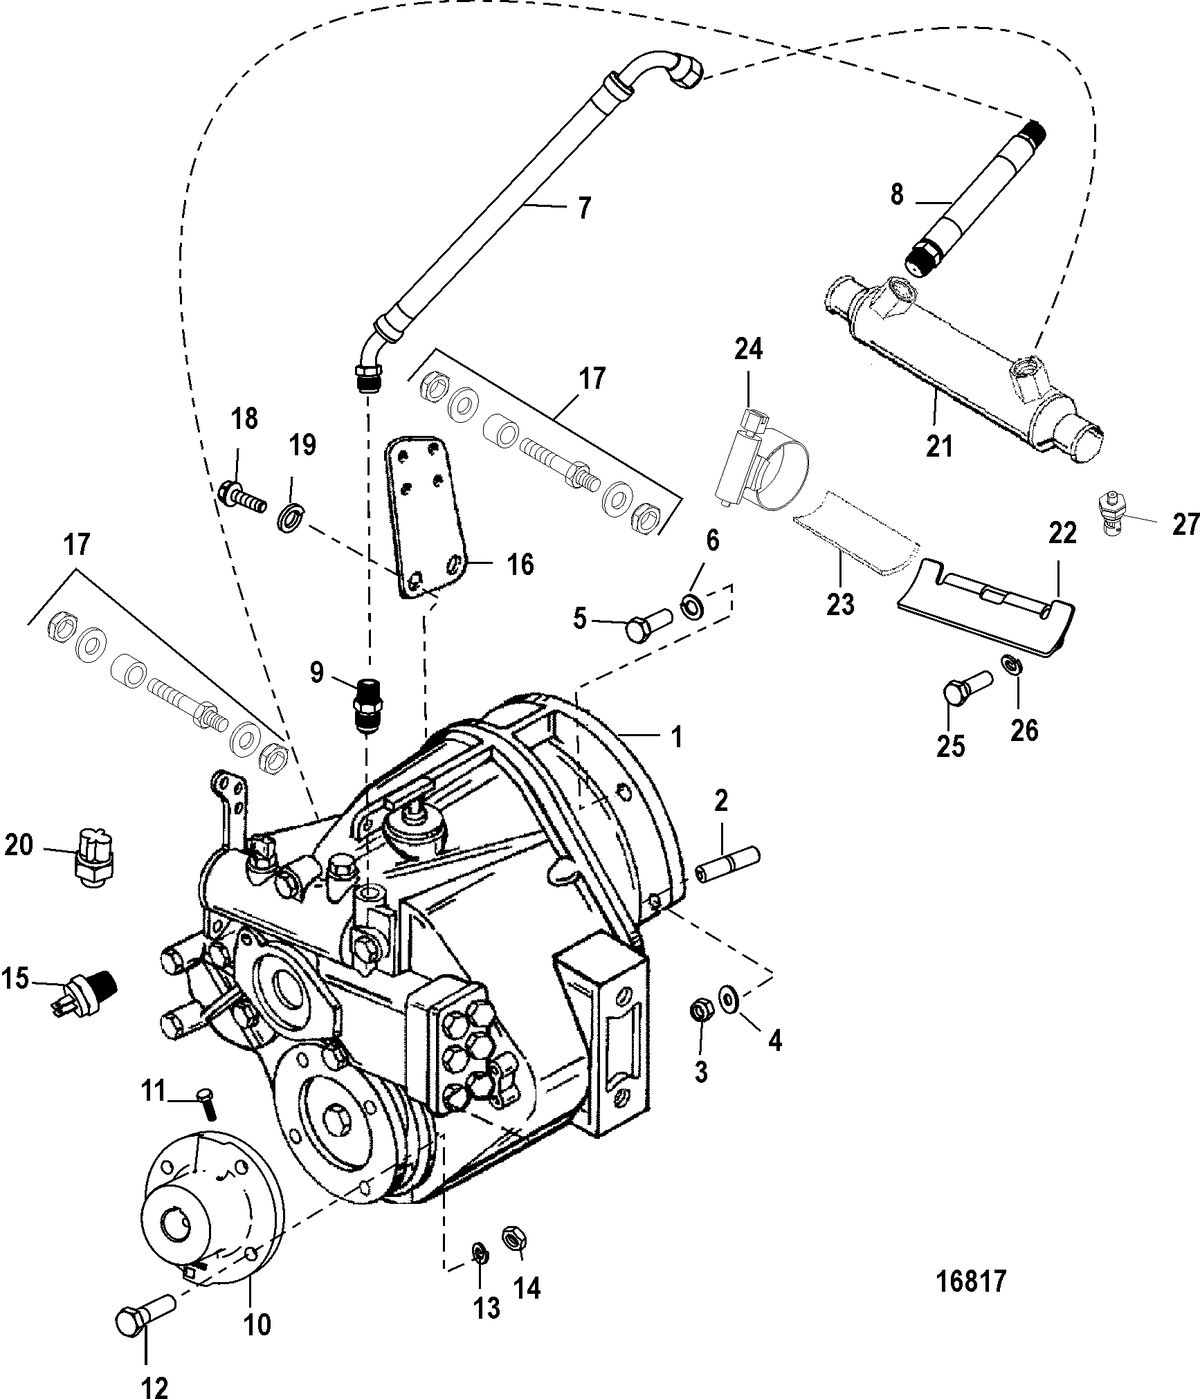 MERCRUISER 8.1L INBOARD Transmission and Related Parts(Borg Warner 5000)